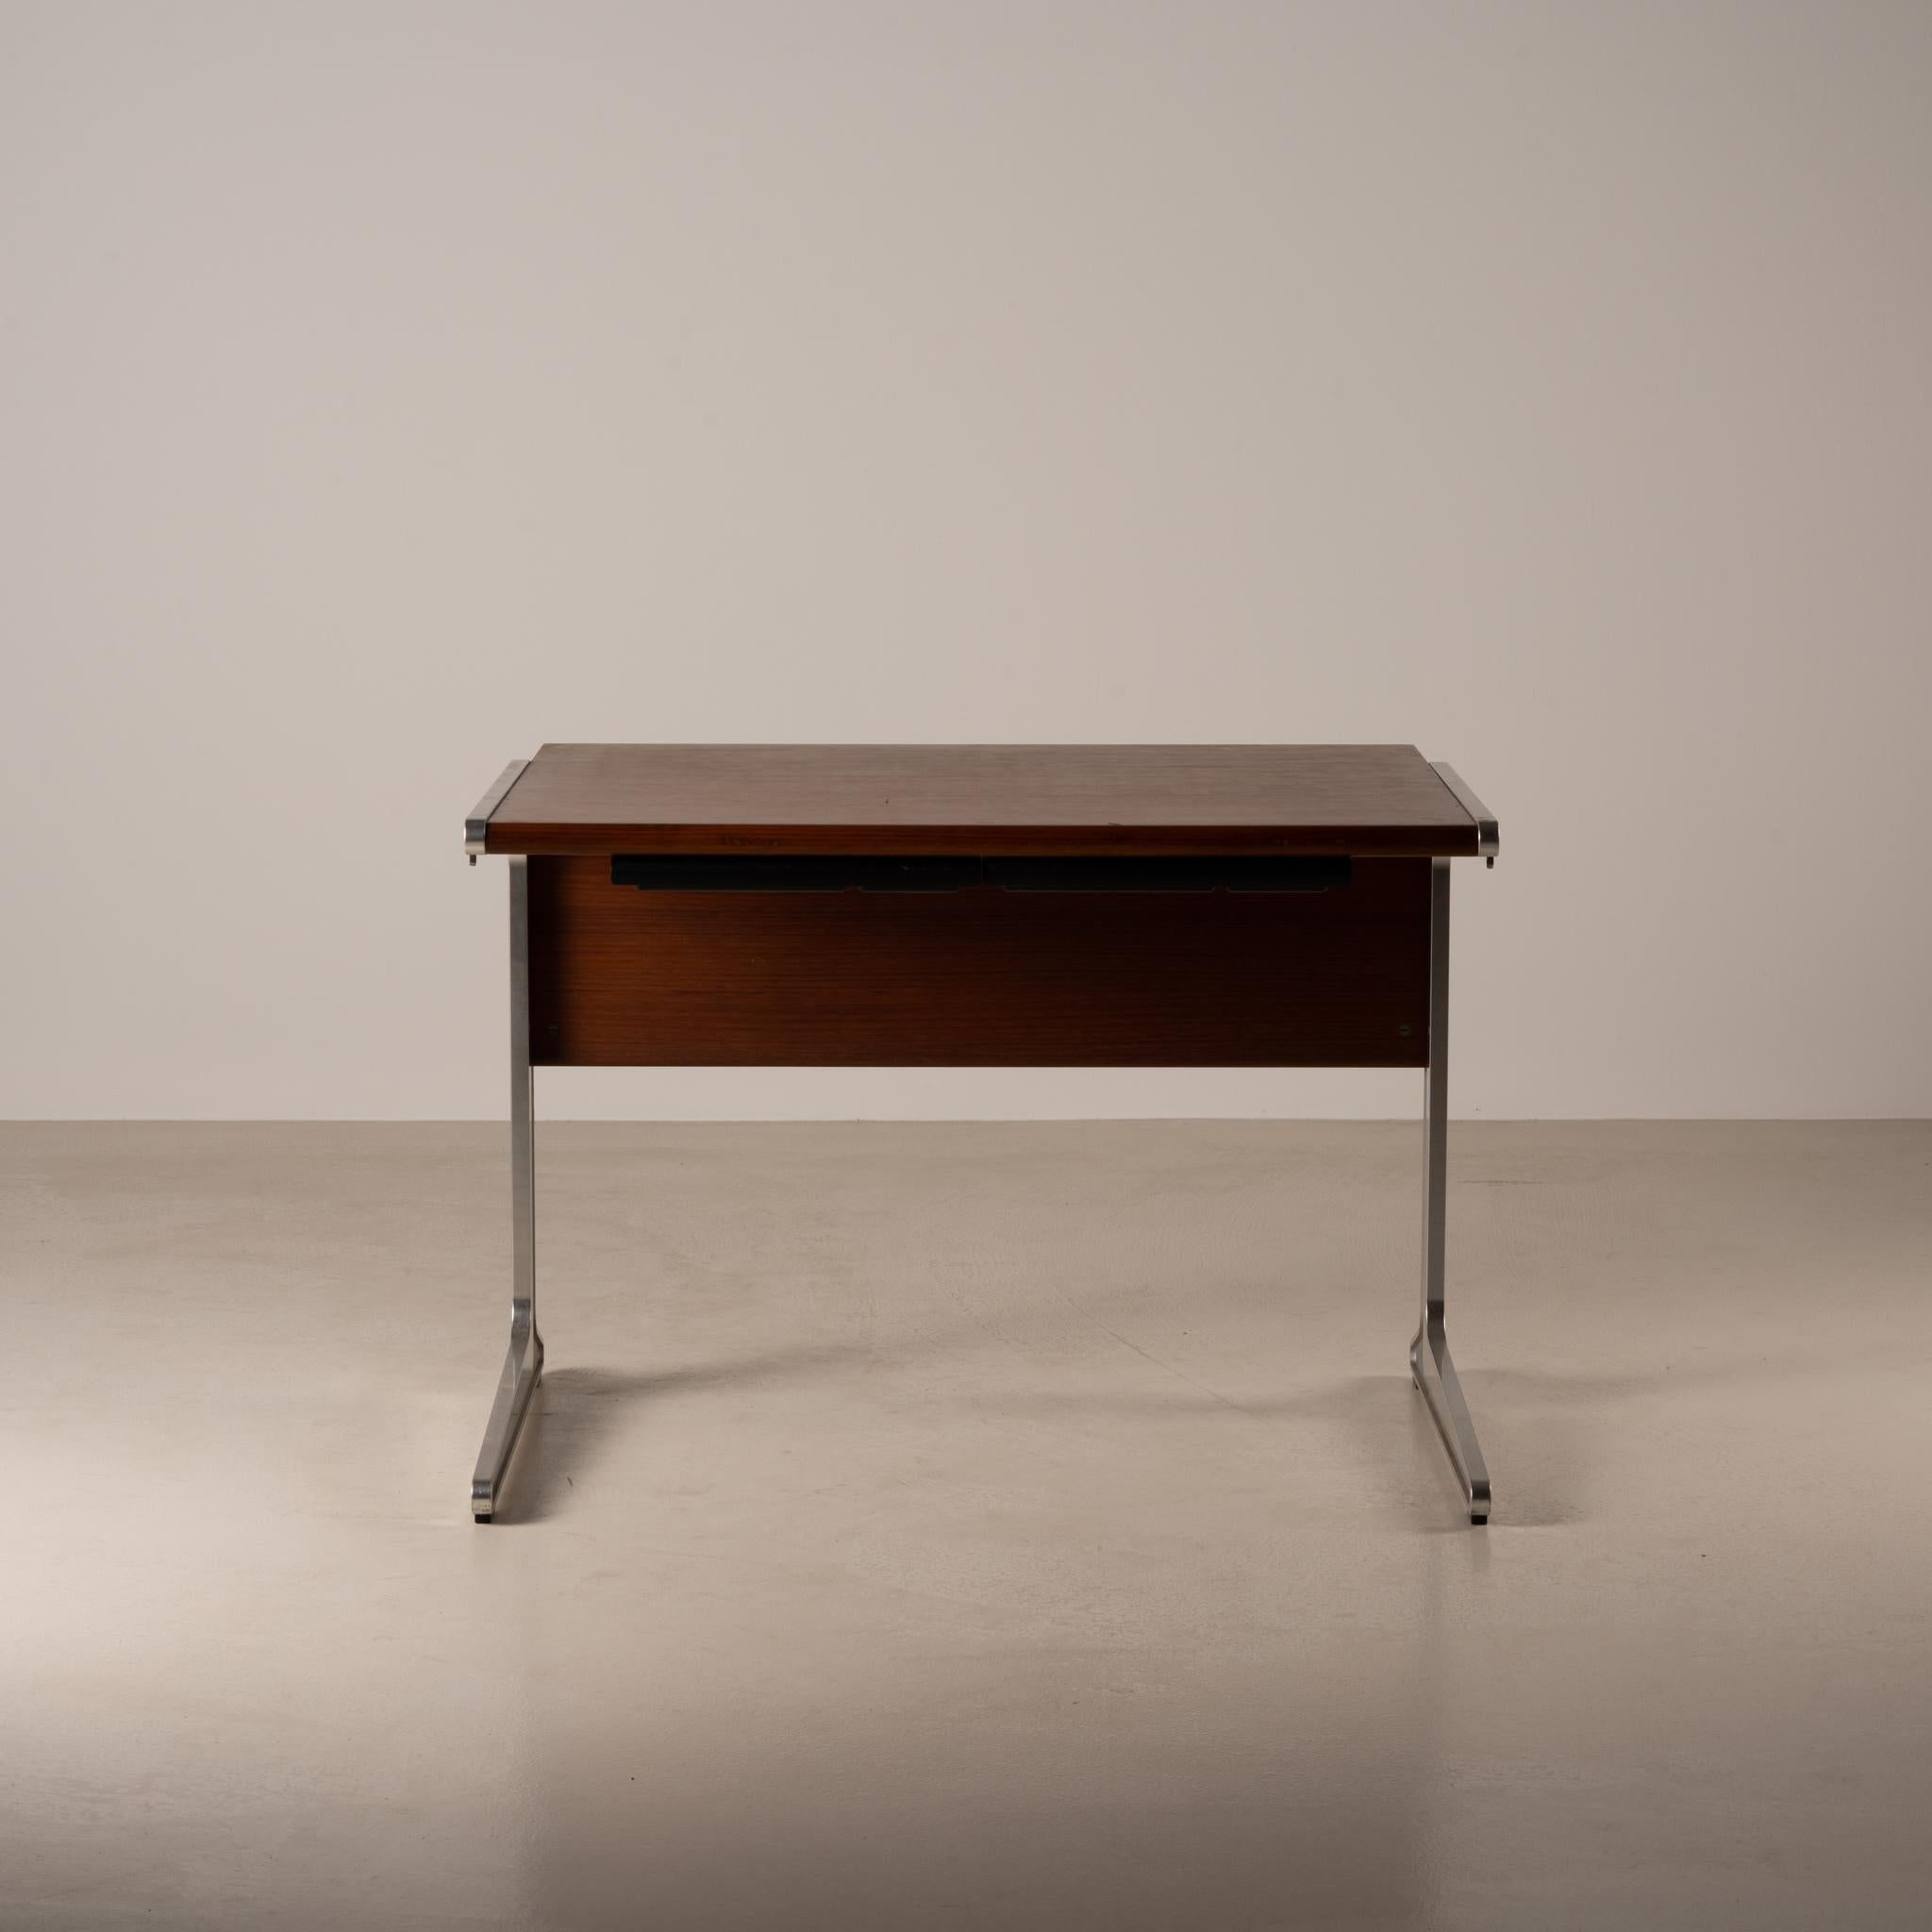 Mid-Century Modern Of Group 1 Desk by Isamu Kenmochi for Tendo Mokko, 1971 For Sale